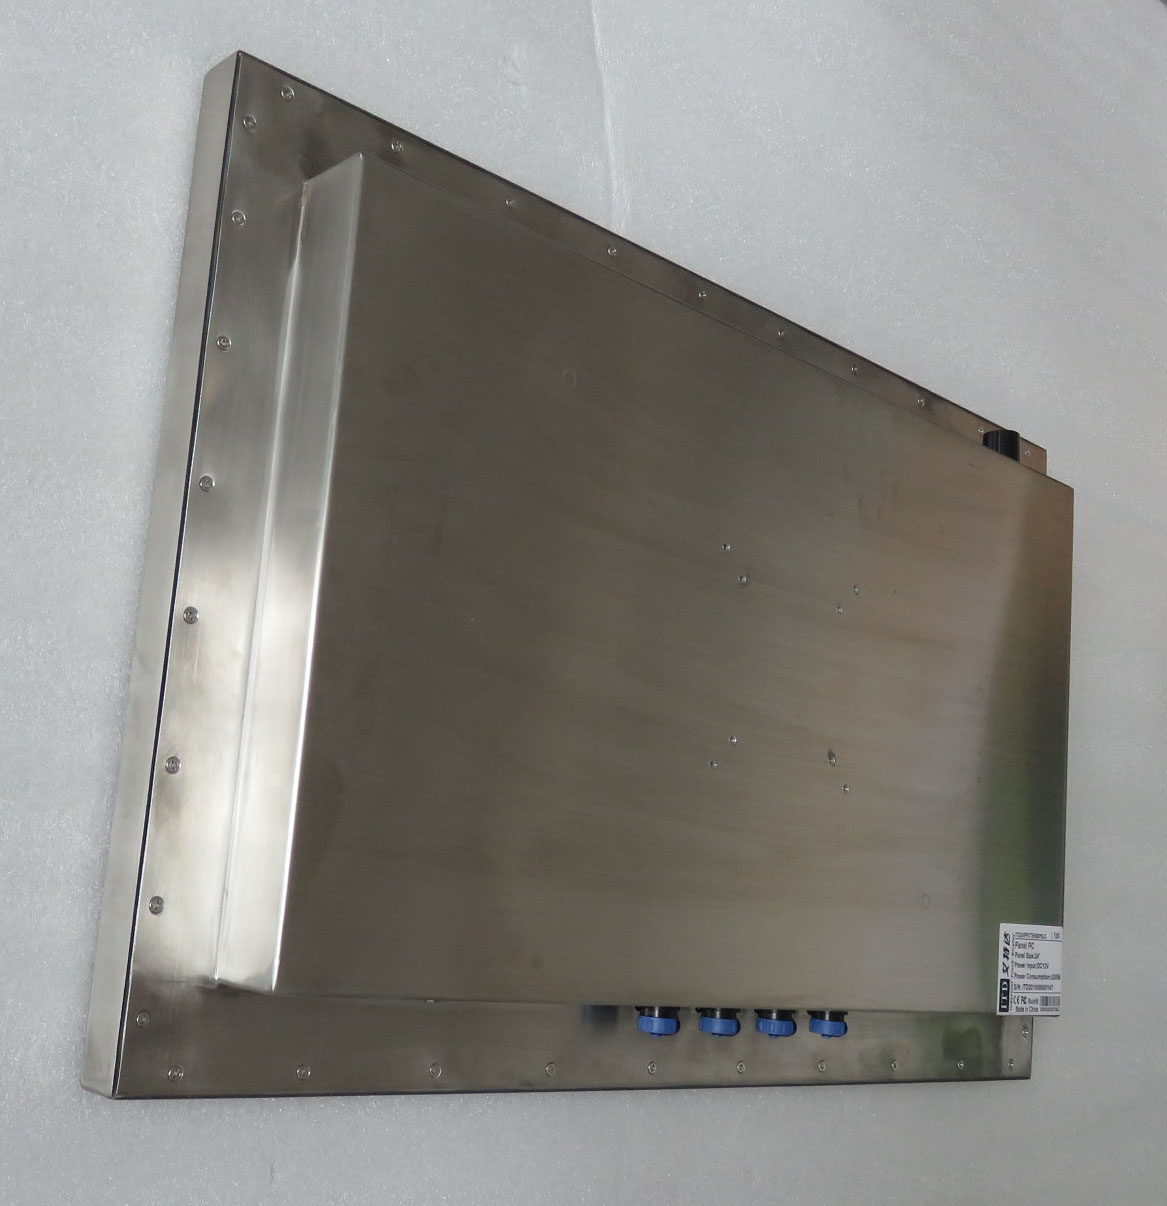 Stainless steel rugged panel PC